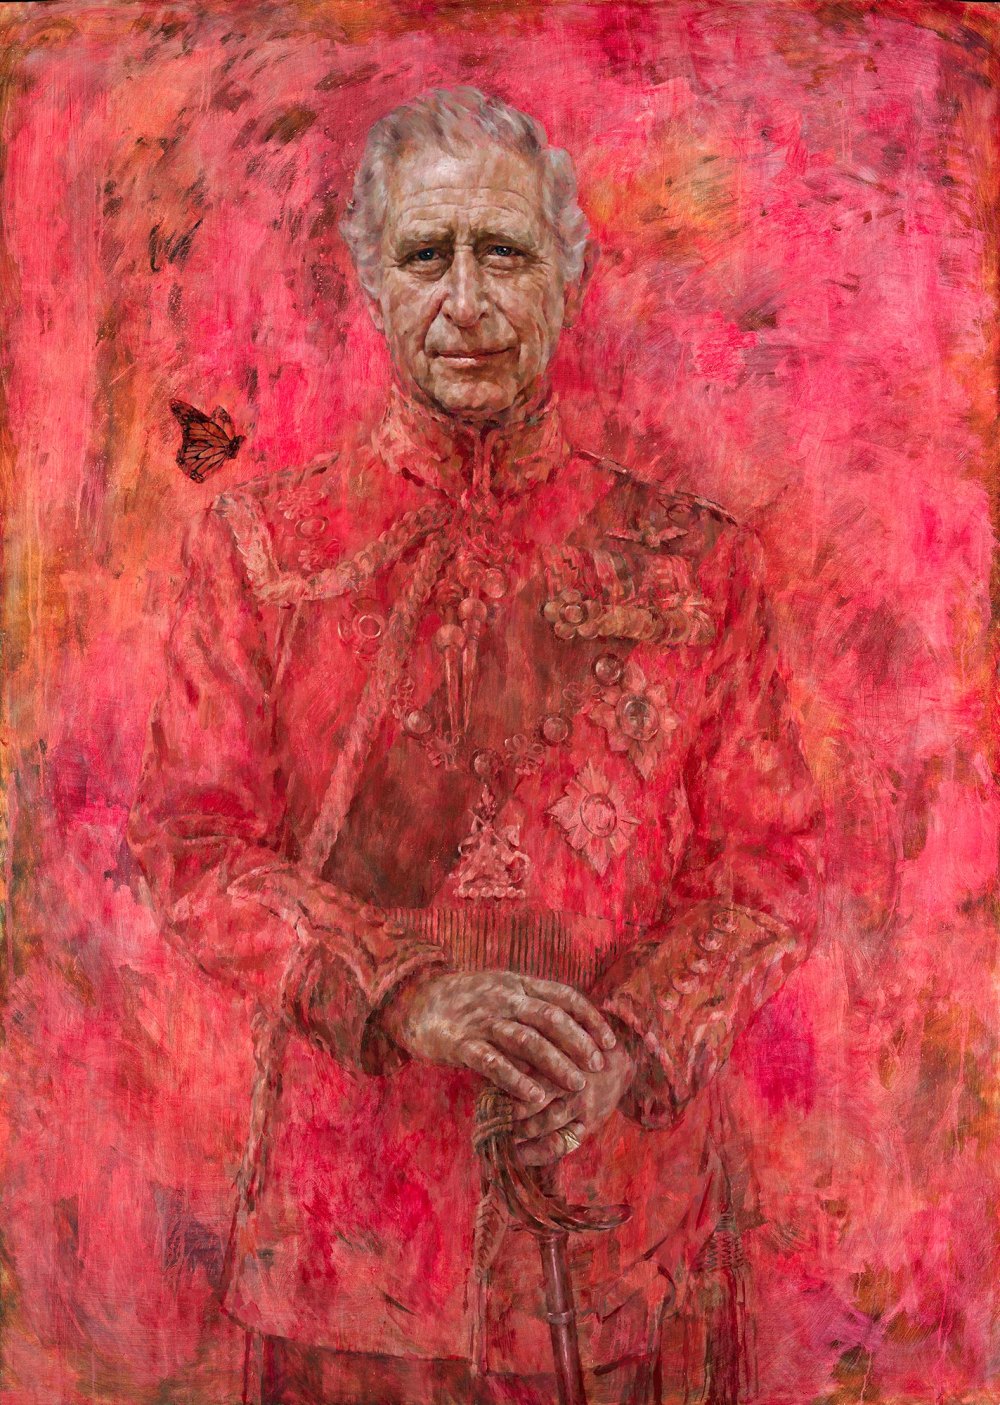 King Charles Artist Explains Why He Chose Red in New Portrait